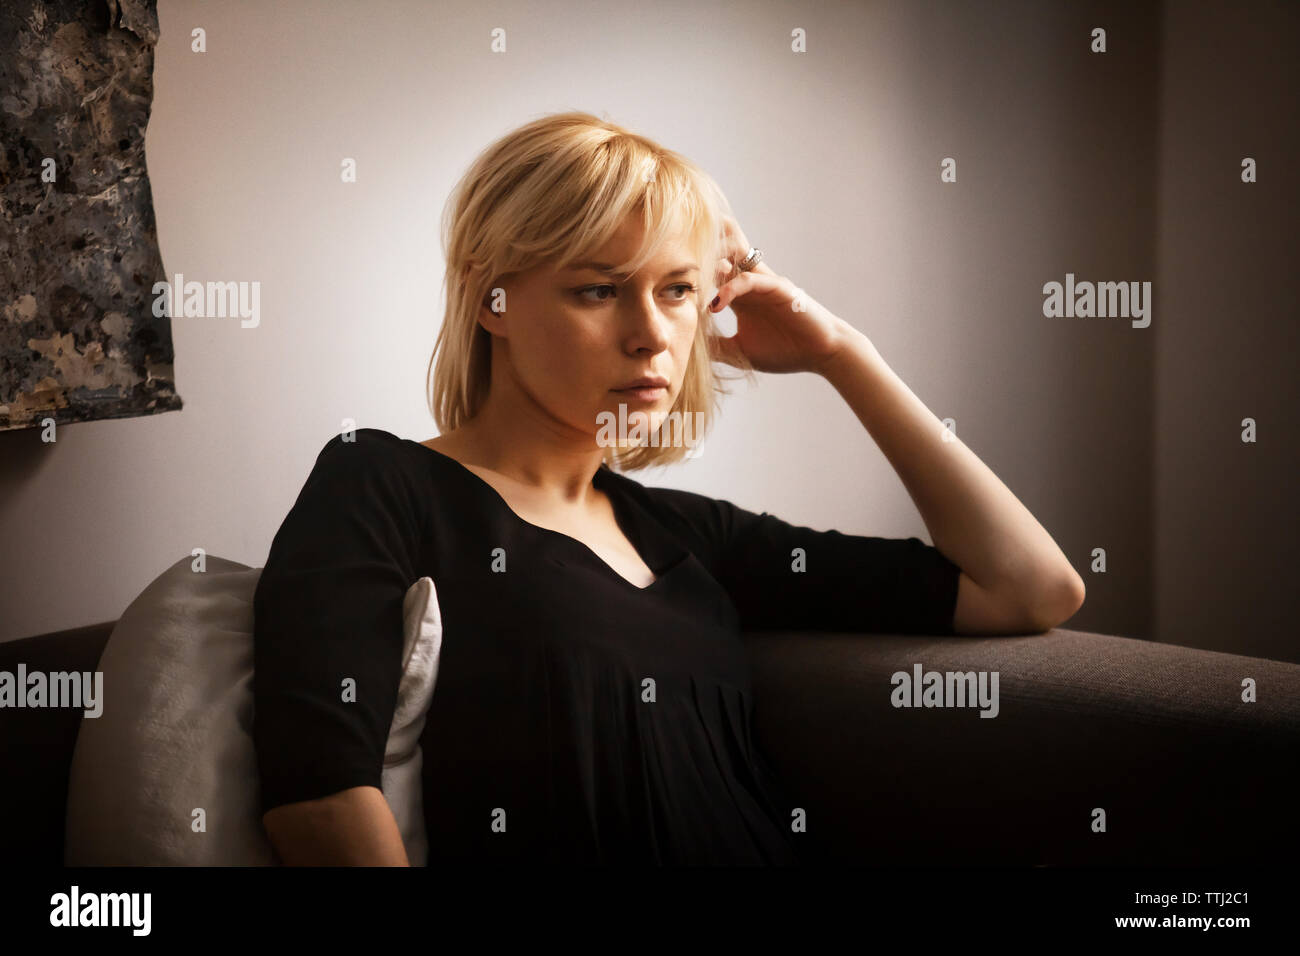 Thoughtful woman with hand in hair sitting on sofa at home Banque D'Images